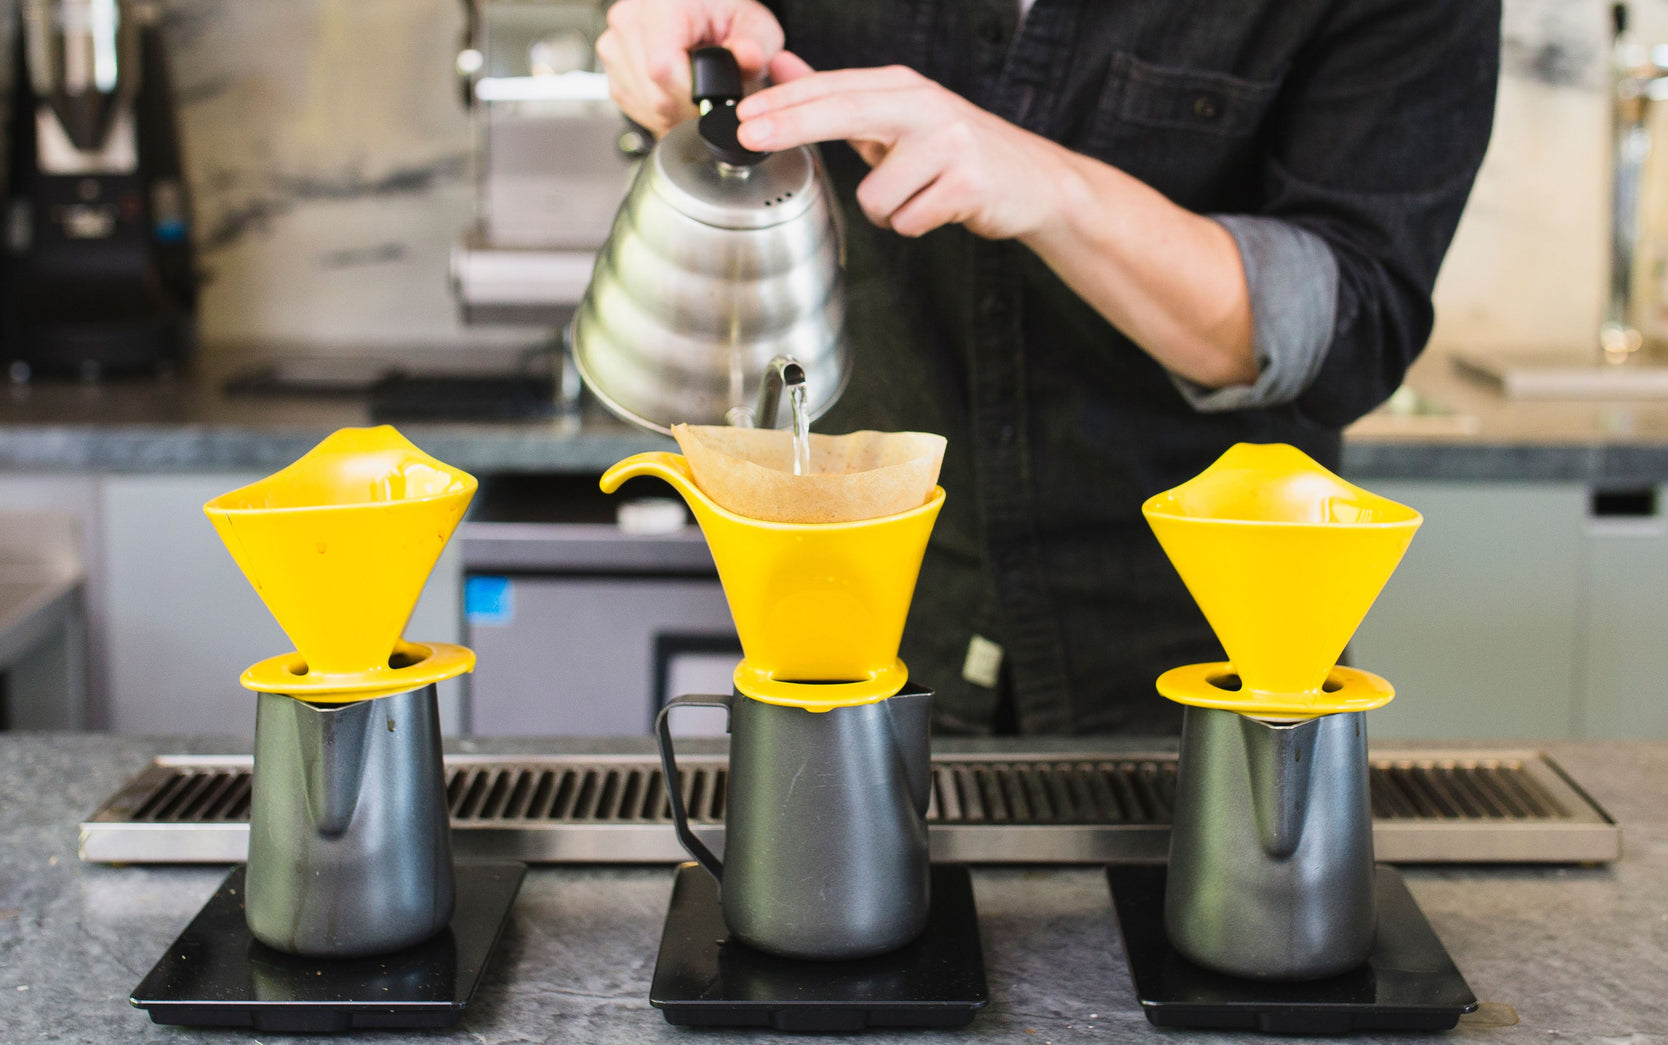 three sets of yellow bee house drippers, and black 20oz steaming pitchers sit in a row as a person brews coffee in the middle set, while pouring from a chrome hario v60 kettle